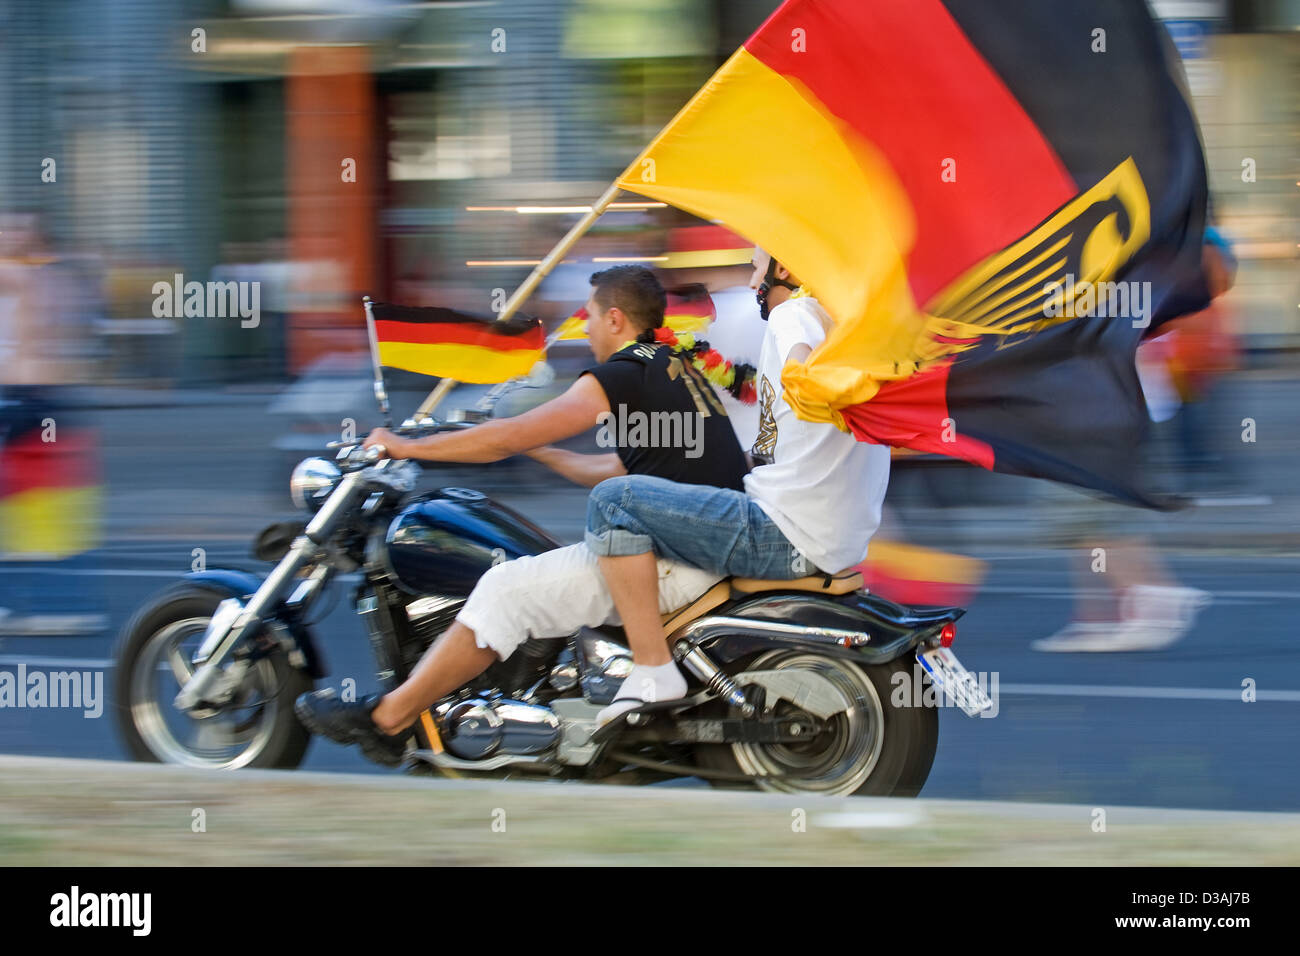 Berlin, Germany, fans on the motorcycle with Germany flag Stock Photo